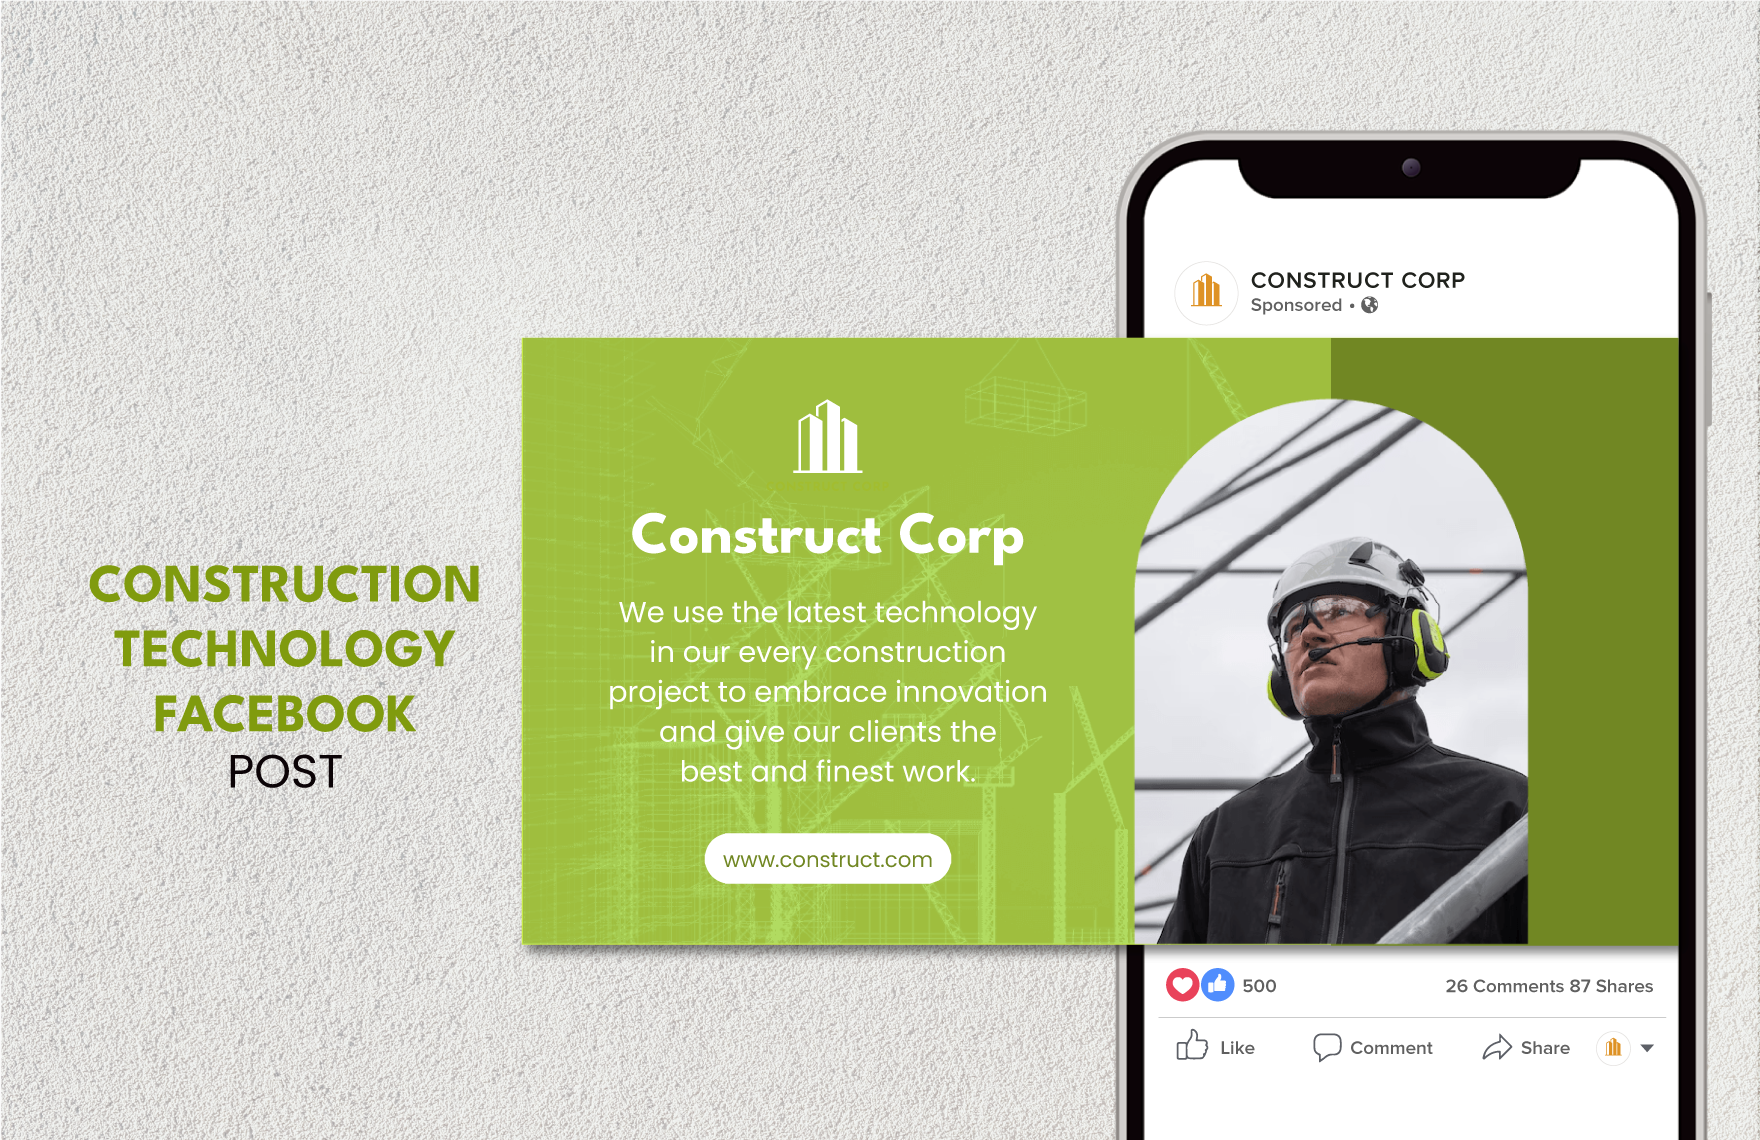 Free Construction Technology Facebook Post in PDF, Illustrator, PSD, SVG, PNG